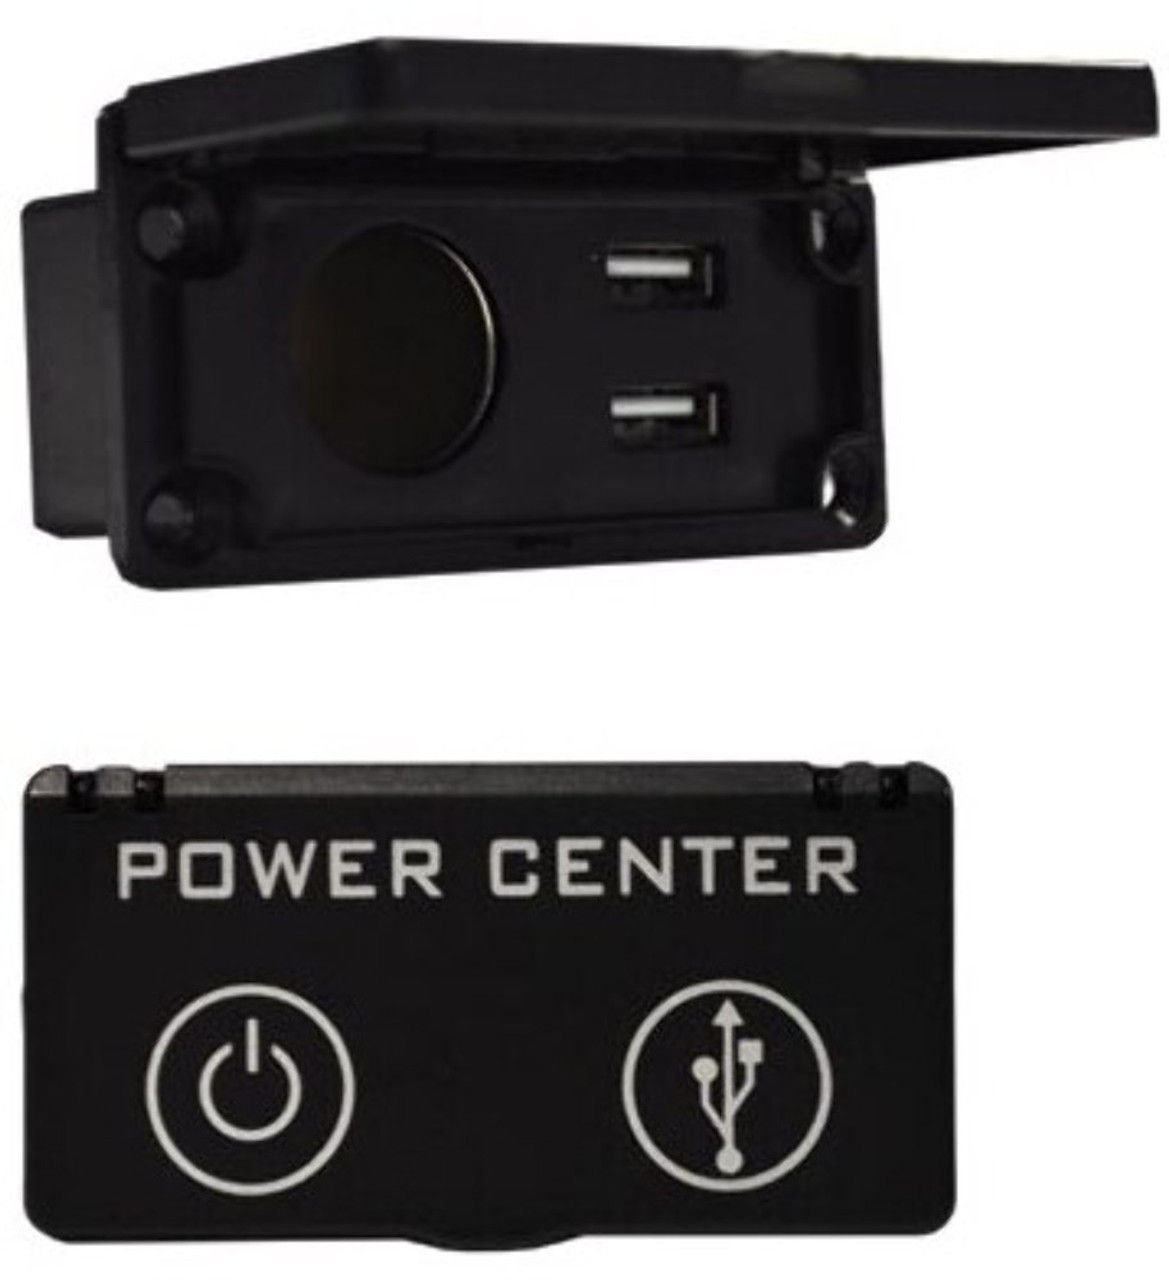 https://cdn11.bigcommerce.com/s-aebdb/images/stencil/1280x1280/products/7514/1160983/13-031-universal-12v-charging-center-with-outlet-and-usb-port-for-most-golf-cart-models__08879.1678726092.jpg?c=2